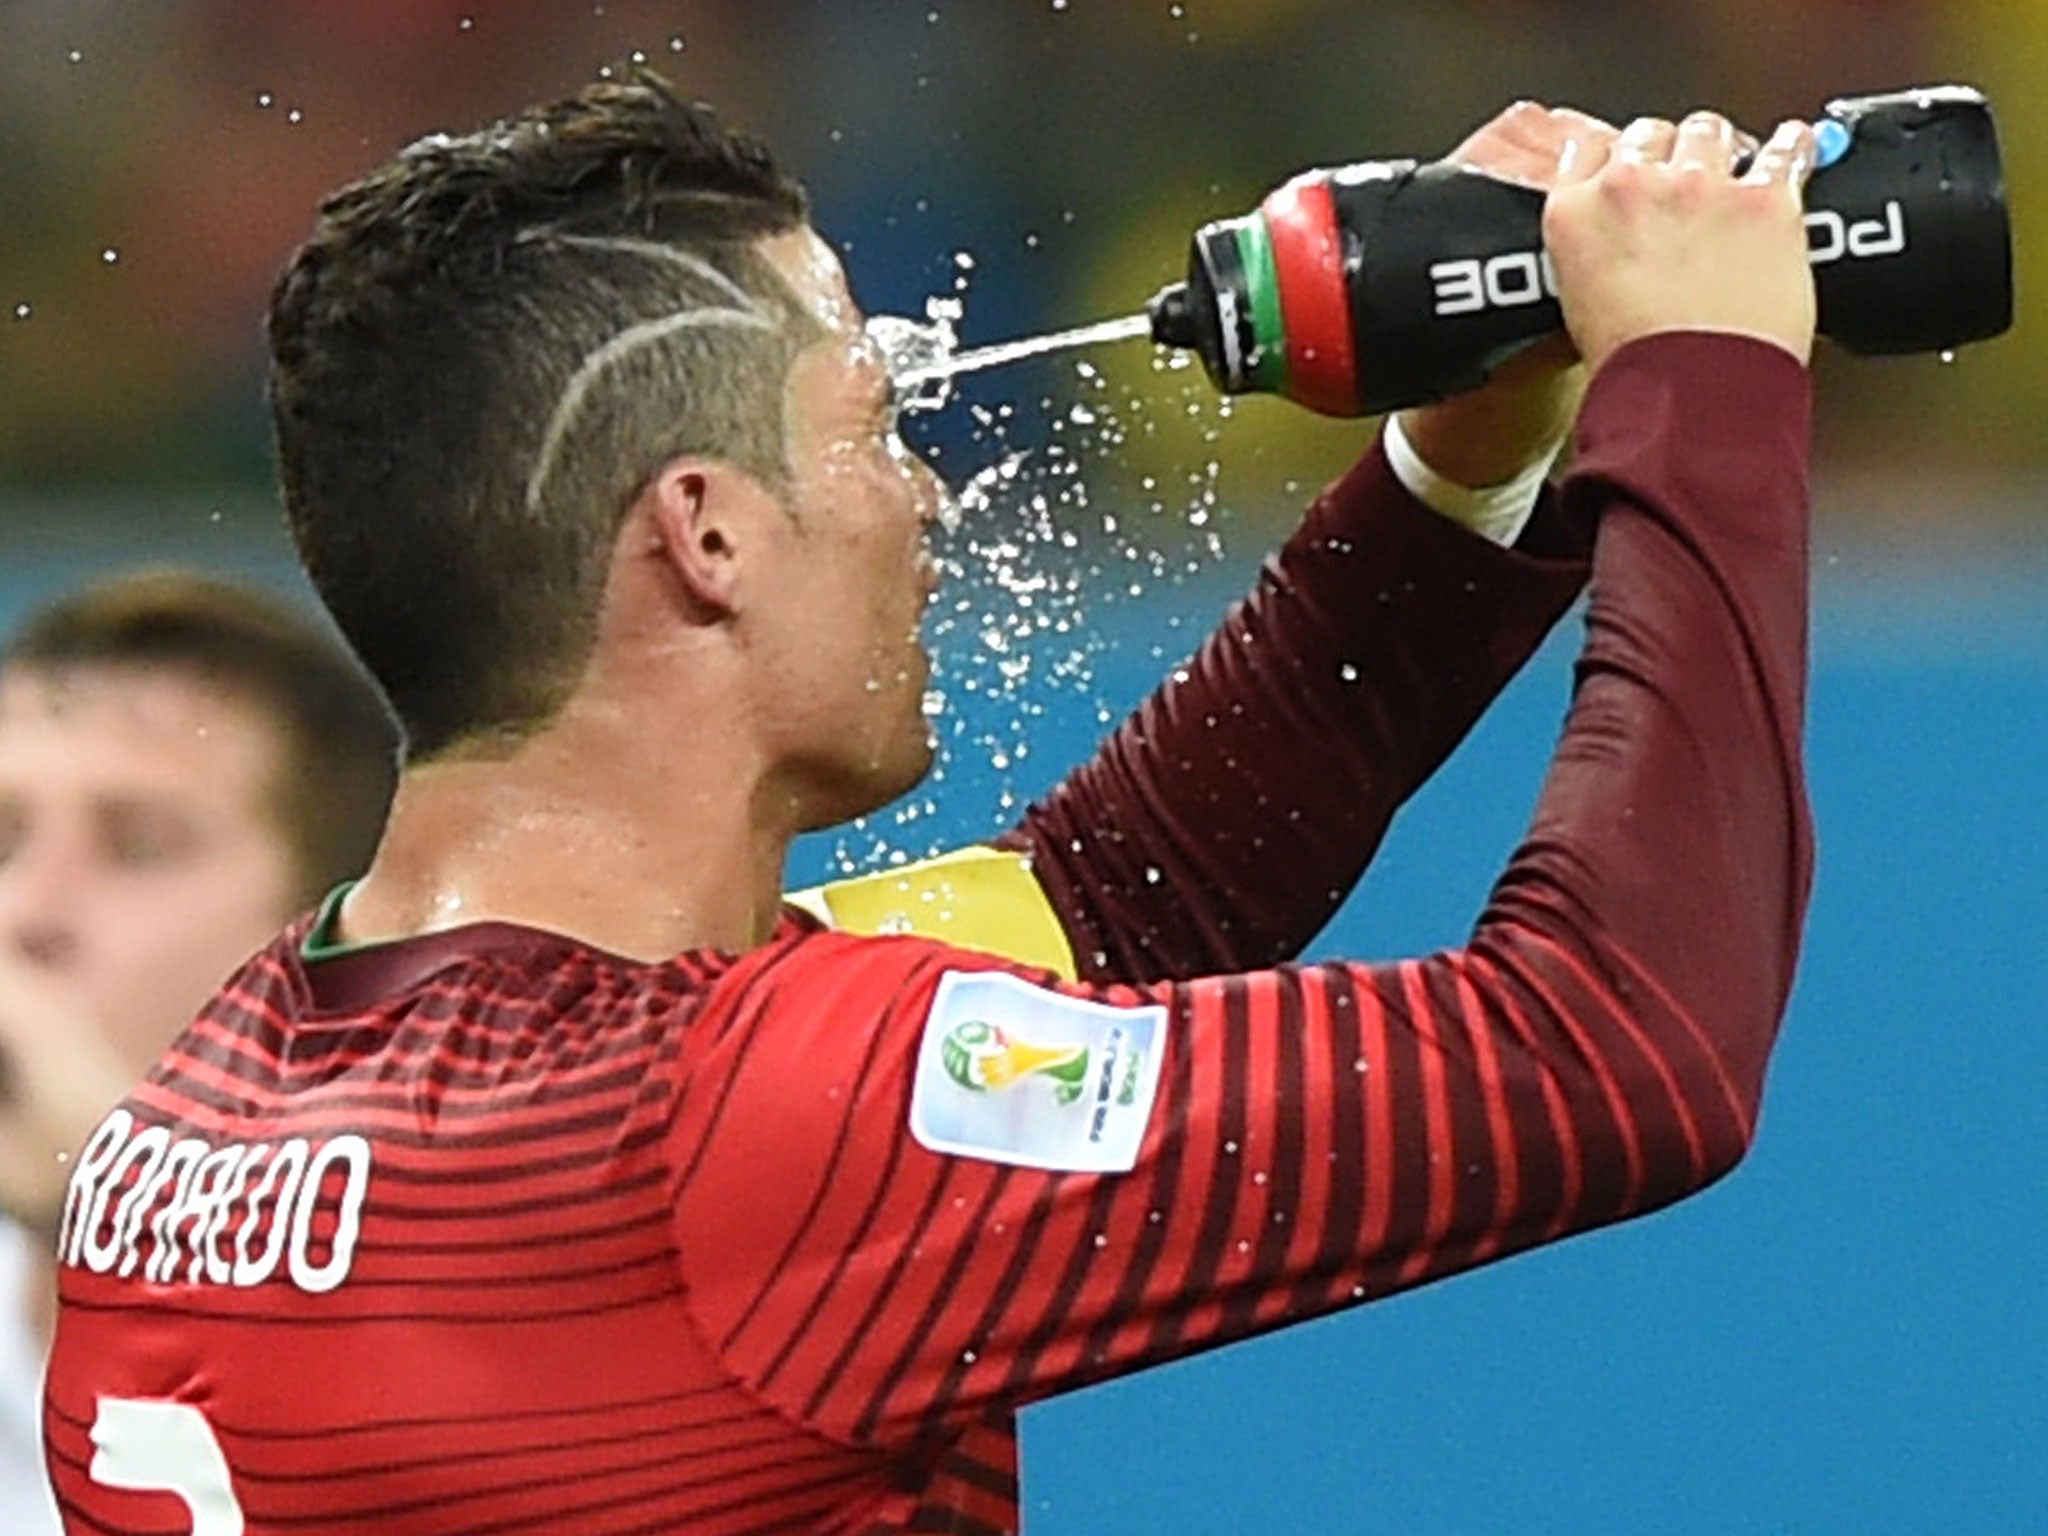 Cristiano Ronaldo is not out of this World Cup just yet